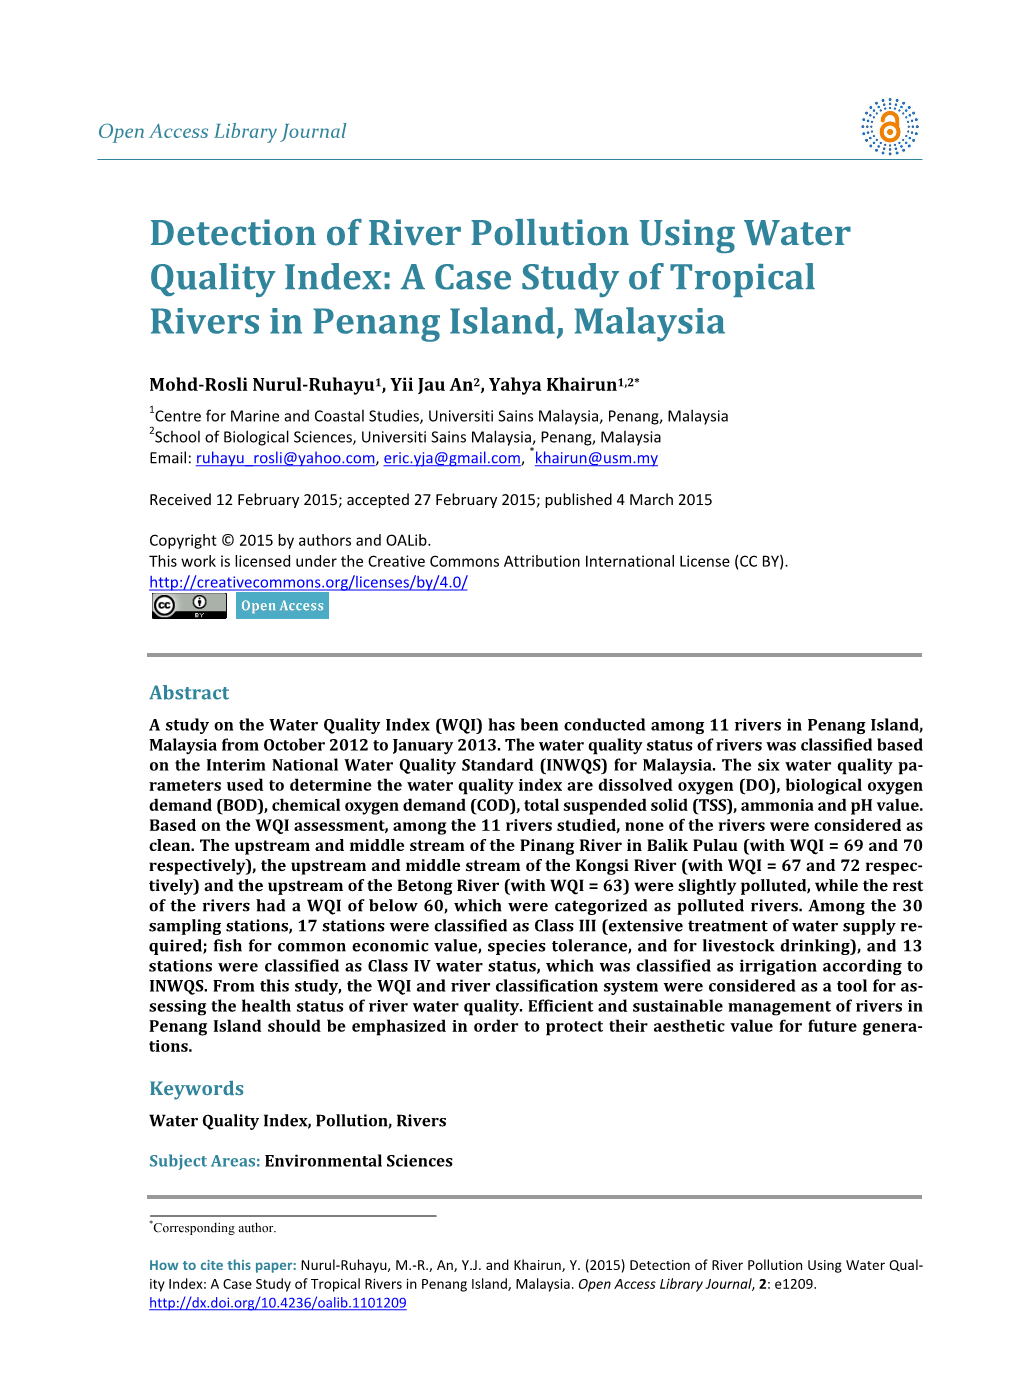 Detection of River Pollution Using Water Quality Index: a Case Study of Tropical Rivers in Penang Island, Malaysia